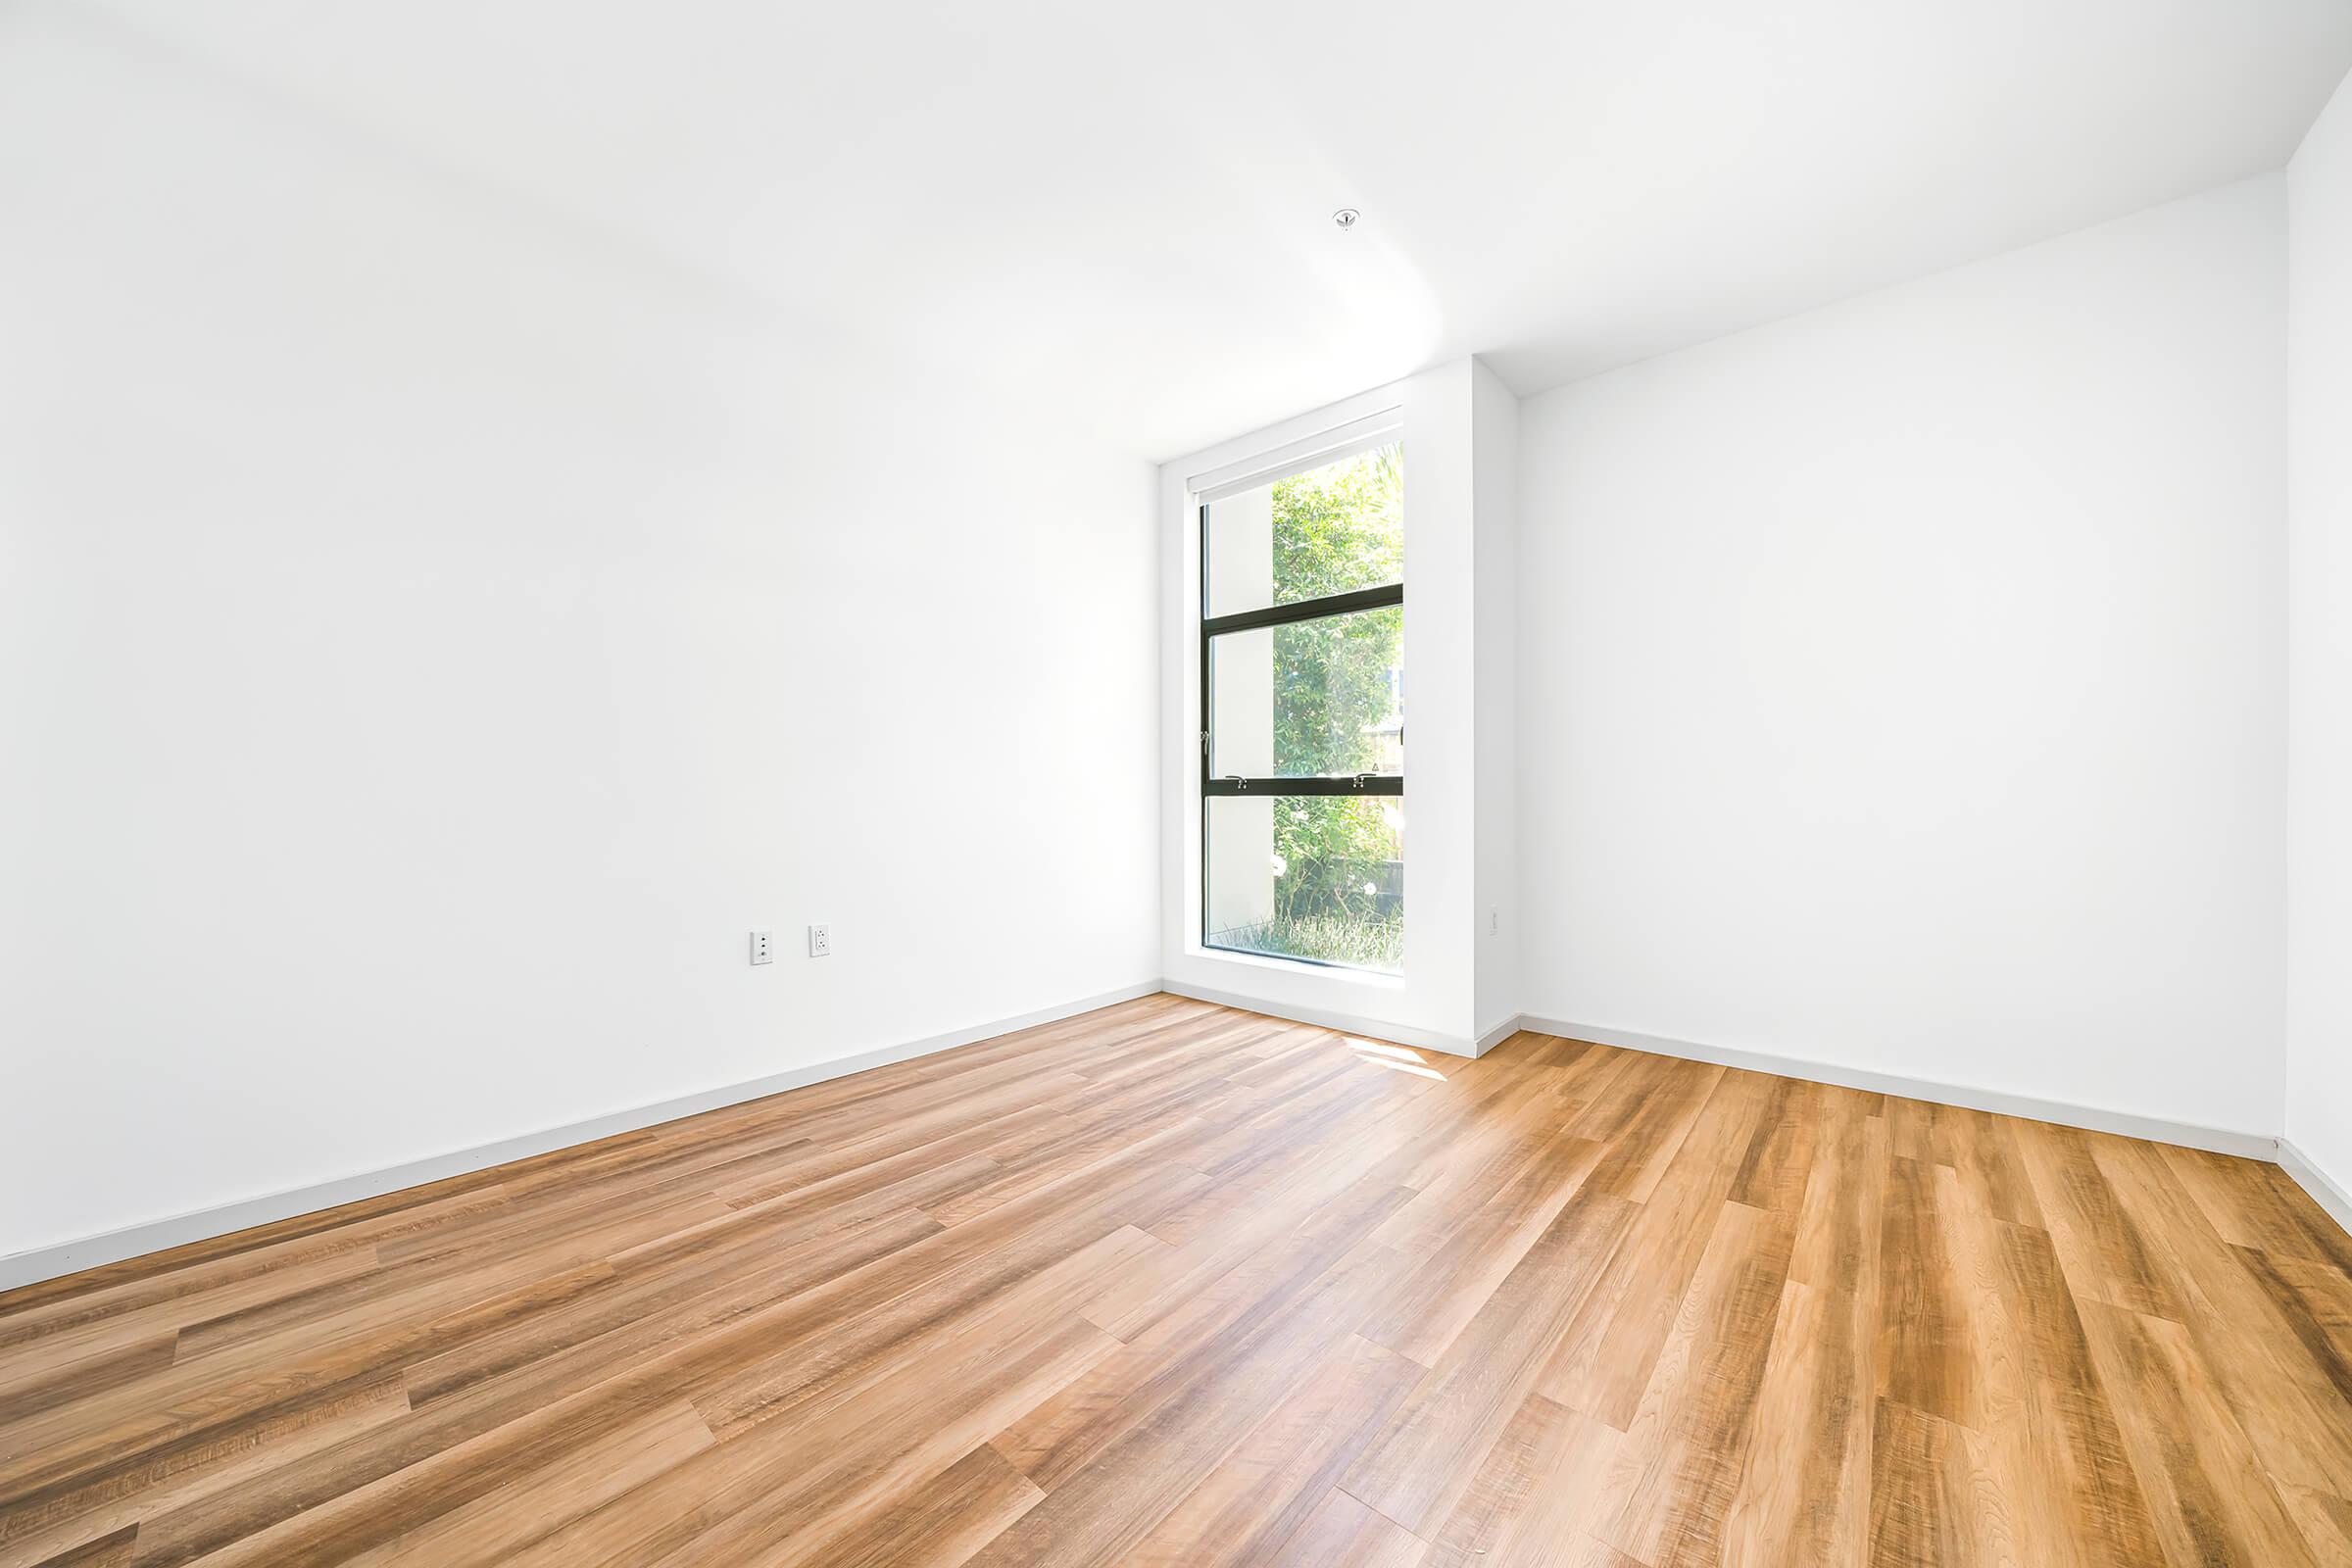 vacant bedroom with wooden floors and a window